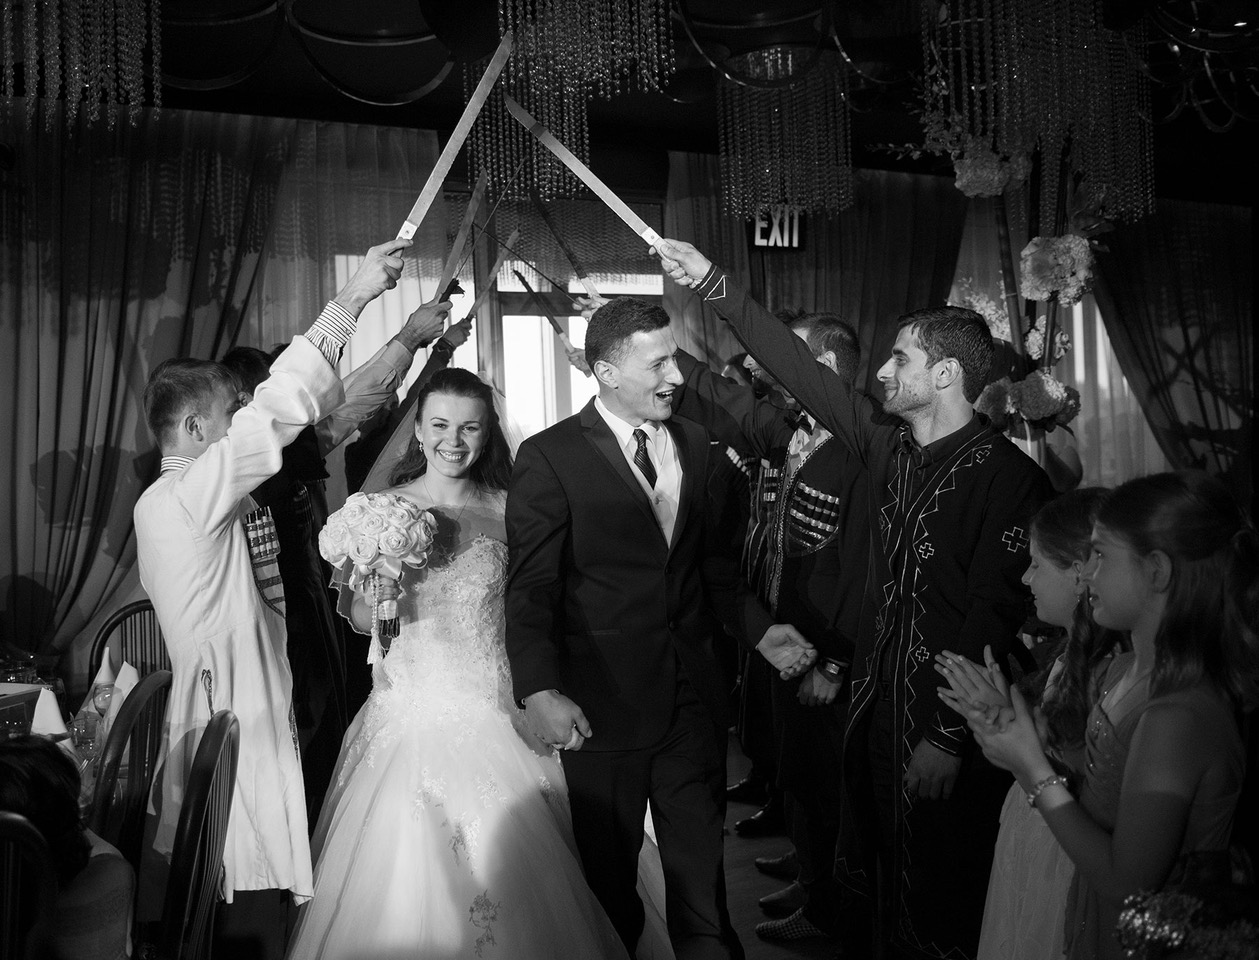 Kate-smiling-with-swords-at-wedding